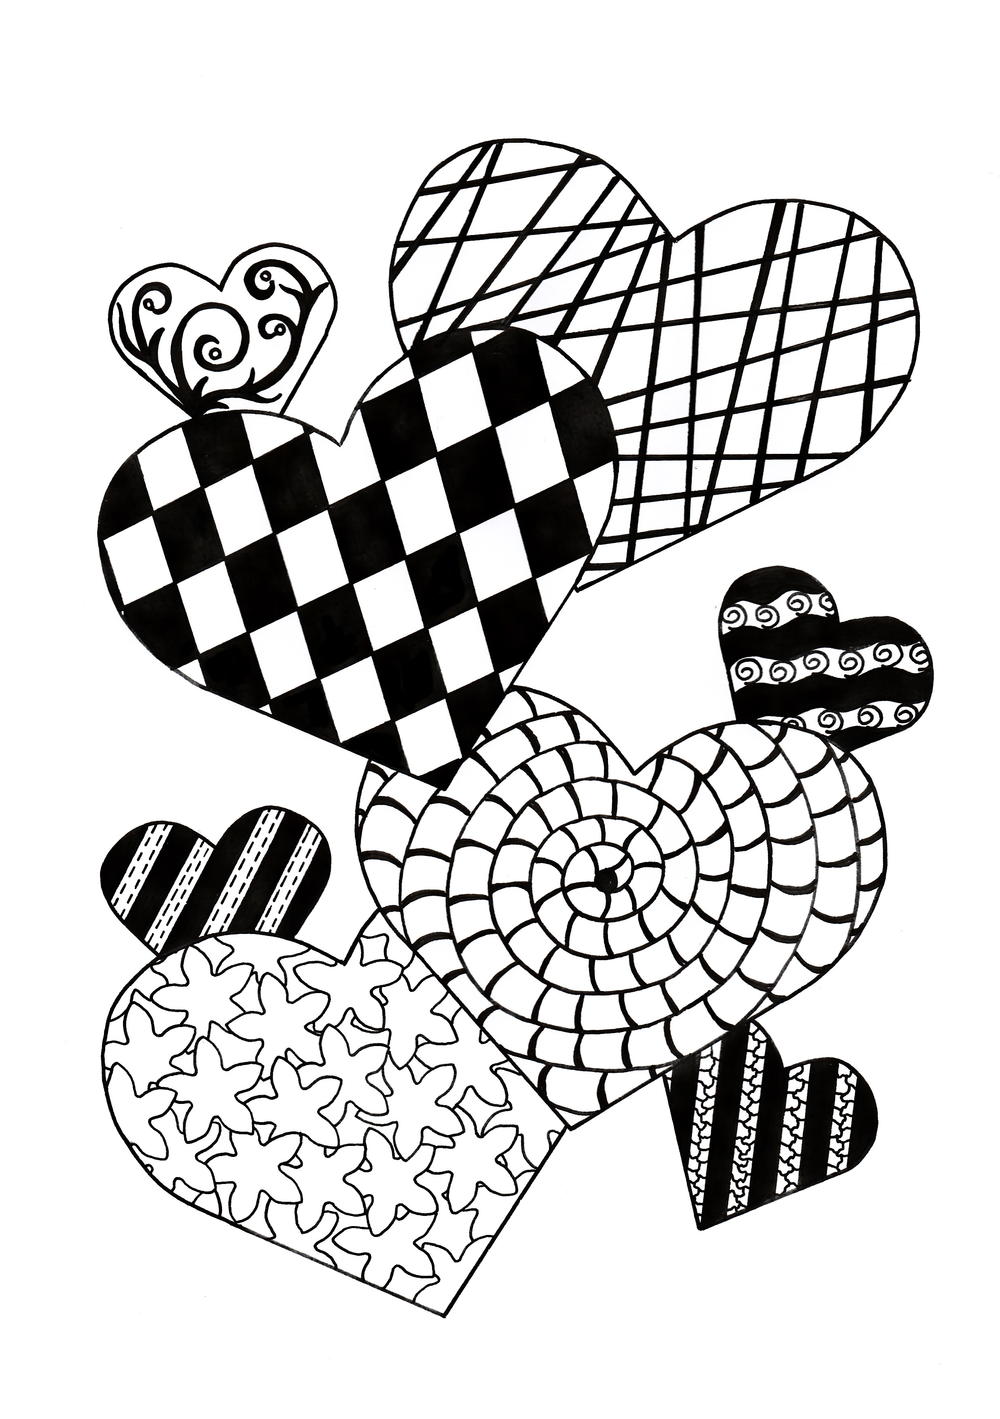 Zentangle Cupid of Hearts Adult Coloring Page   FaveCrafts.com